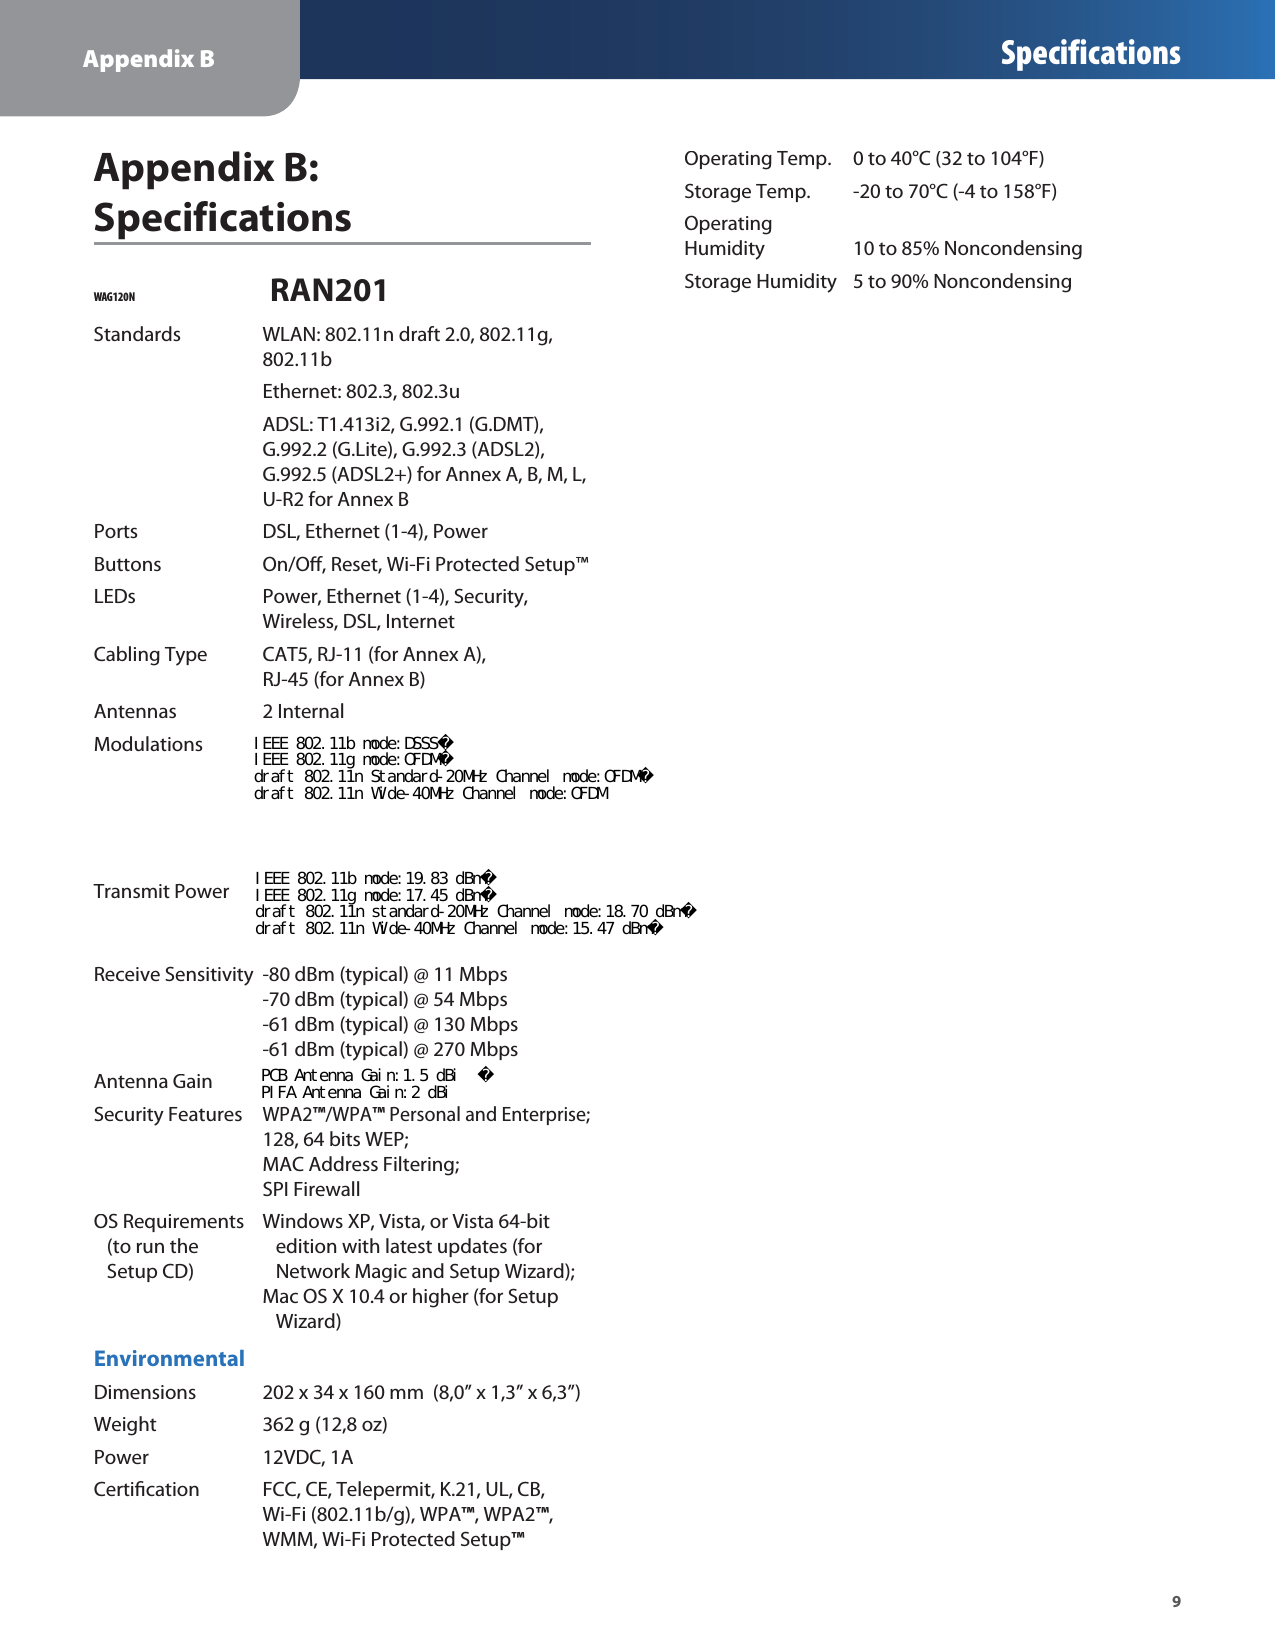 Appendix B Specifications9Appendix B:  SpecificationsWAG120N                    RAN201StandardsWLAN: 802.11n draft 2.0, 802.11g,802.11bEthernet: 802.3, 802.3uADSL: T1.413i2, G.992.1 (G.DMT),G.992.2 (G.Lite), G.992.3 (ADSL2),G.992.5 (ADSL2+) for Annex A, B, M, L, U-R2 for Annex BPortsDSL, Ethernet (1-4), PowerButtonsOn/O, Reset, Wi-Fi Protected Setup™LEDs Power, Ethernet (1-4), Security,Wireless, DSL, InternetCabling TypeCAT5, RJ-11 (for Annex A),RJ-45 (for Annex B)Antennas2 InternalModulationsTransmit PowerReceive Sensitivity-80 dBm (typical) @ 11 Mbps-70 dBm (typical) @ 54 Mbps-61 dBm (typical) @ 130 Mbps-61 dBm (typical) @ 270 MbpsAntenna GainSecurity FeaturesWPA2™/WPA™ Personal and Enterprise;128, 64 bits WEP;MAC Address Filtering;SPI FirewallOS RequirementsWindows XP, Vista, or Vista 64-bit   (to run the   edition with latest updates (for   Setup CD)    Network Magic and Setup Wizard);Mac OS X 10.4 or higher (for Setup   Wizard)EnvironmentalDimensions202 x 34 x 160 mm  (8,0” x 1,3” x 6,3”)Weight362 g (12,8 oz)Power12VDC, 1ACerticationFCC, CE, Telepermit, K.21, UL, CB,Wi-Fi (802.11b/g), WPA™, WPA2™,WMM, Wi-Fi Protected Setup™Operating Temp.0 to 40°C (32 to 104°F)Storage Temp. -20 to 70°C (-4 to 158°F)OperatingHumidity10 to 85% NoncondensingStorage Humidity5 to 90% NoncondensingIEEE 802.11b mode:19.83 dBmIEEE 802.11g mode:17.45 dBmdraft 802.11n standard-20MHz Channel mode:18.70 dBmdraft 802.11n Wide-40MHz Channel mode:15.47 dBmIEEE 802.11b mode:DSSSIEEE 802.11g mode:OFDMdraft 802.11n Standard-20MHz Channel mode:OFDMdraft 802.11n Wide-40MHz Channel mode:OFDMPCB Antenna Gain:1.5 dBi  PIFA Antenna Gain:2 dBi